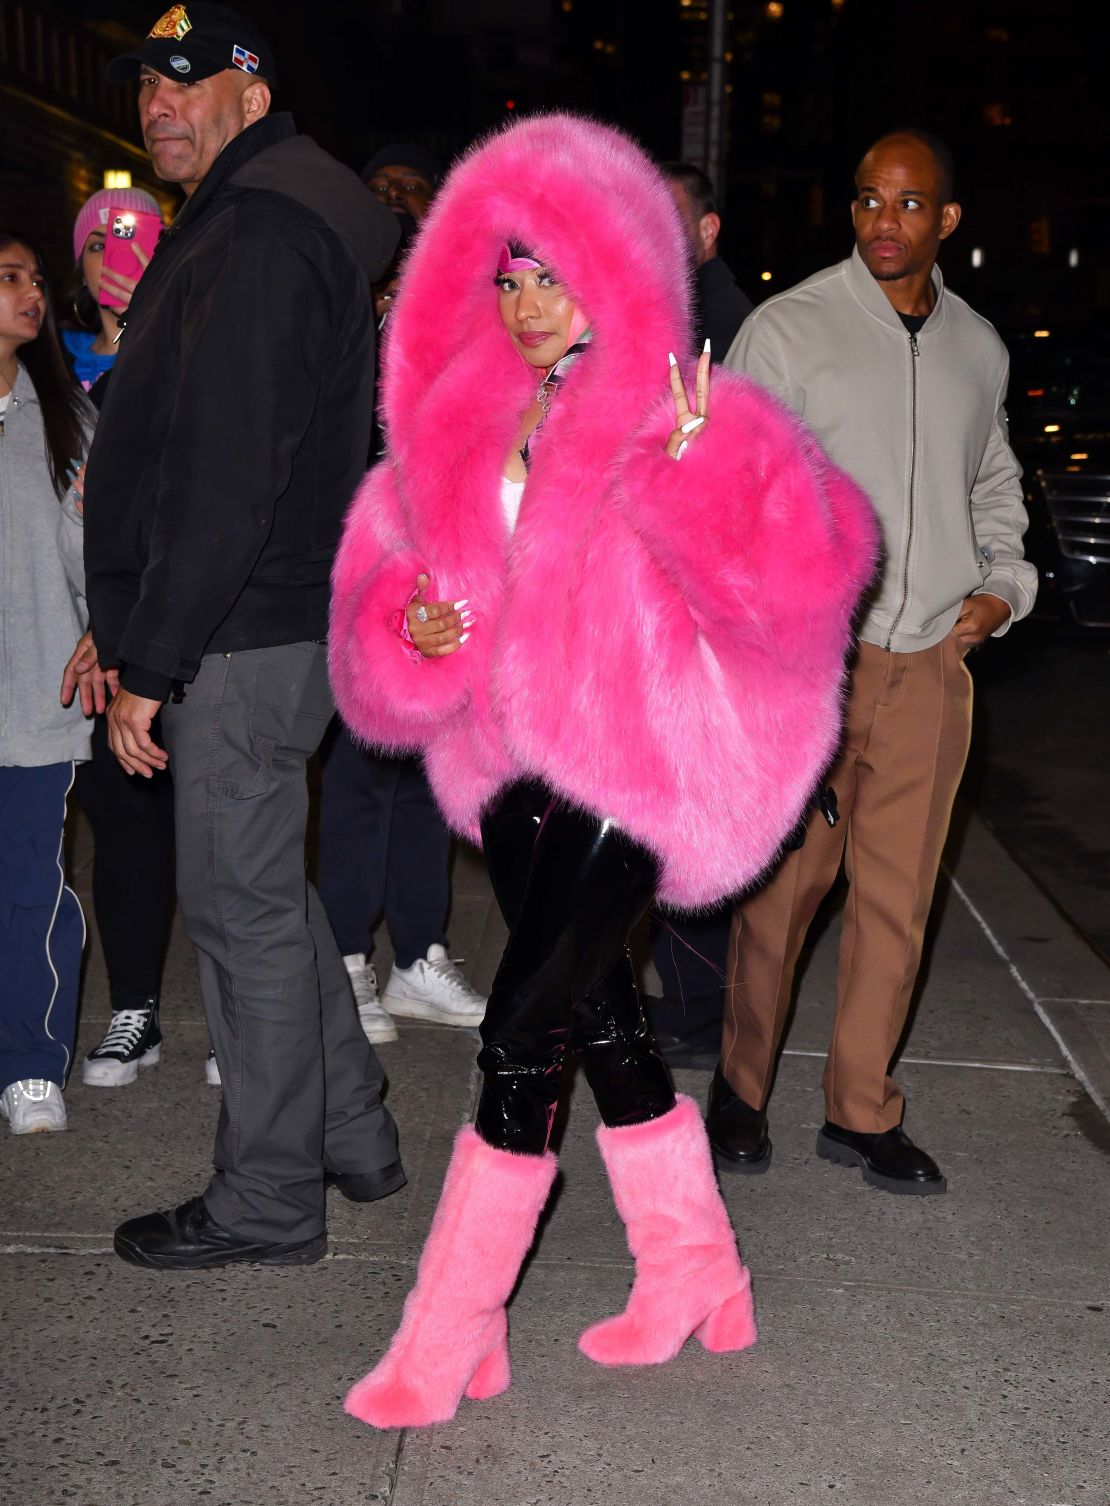 NEW YORK, NEW YORK - DECEMBER 11:  Nicki Minaj arrives at 'The Late Show With Stephen Colbert' at the Ed Sullivan Theater on December 11, 2023 in New York City. (Photo by James Devaney/GC Images)